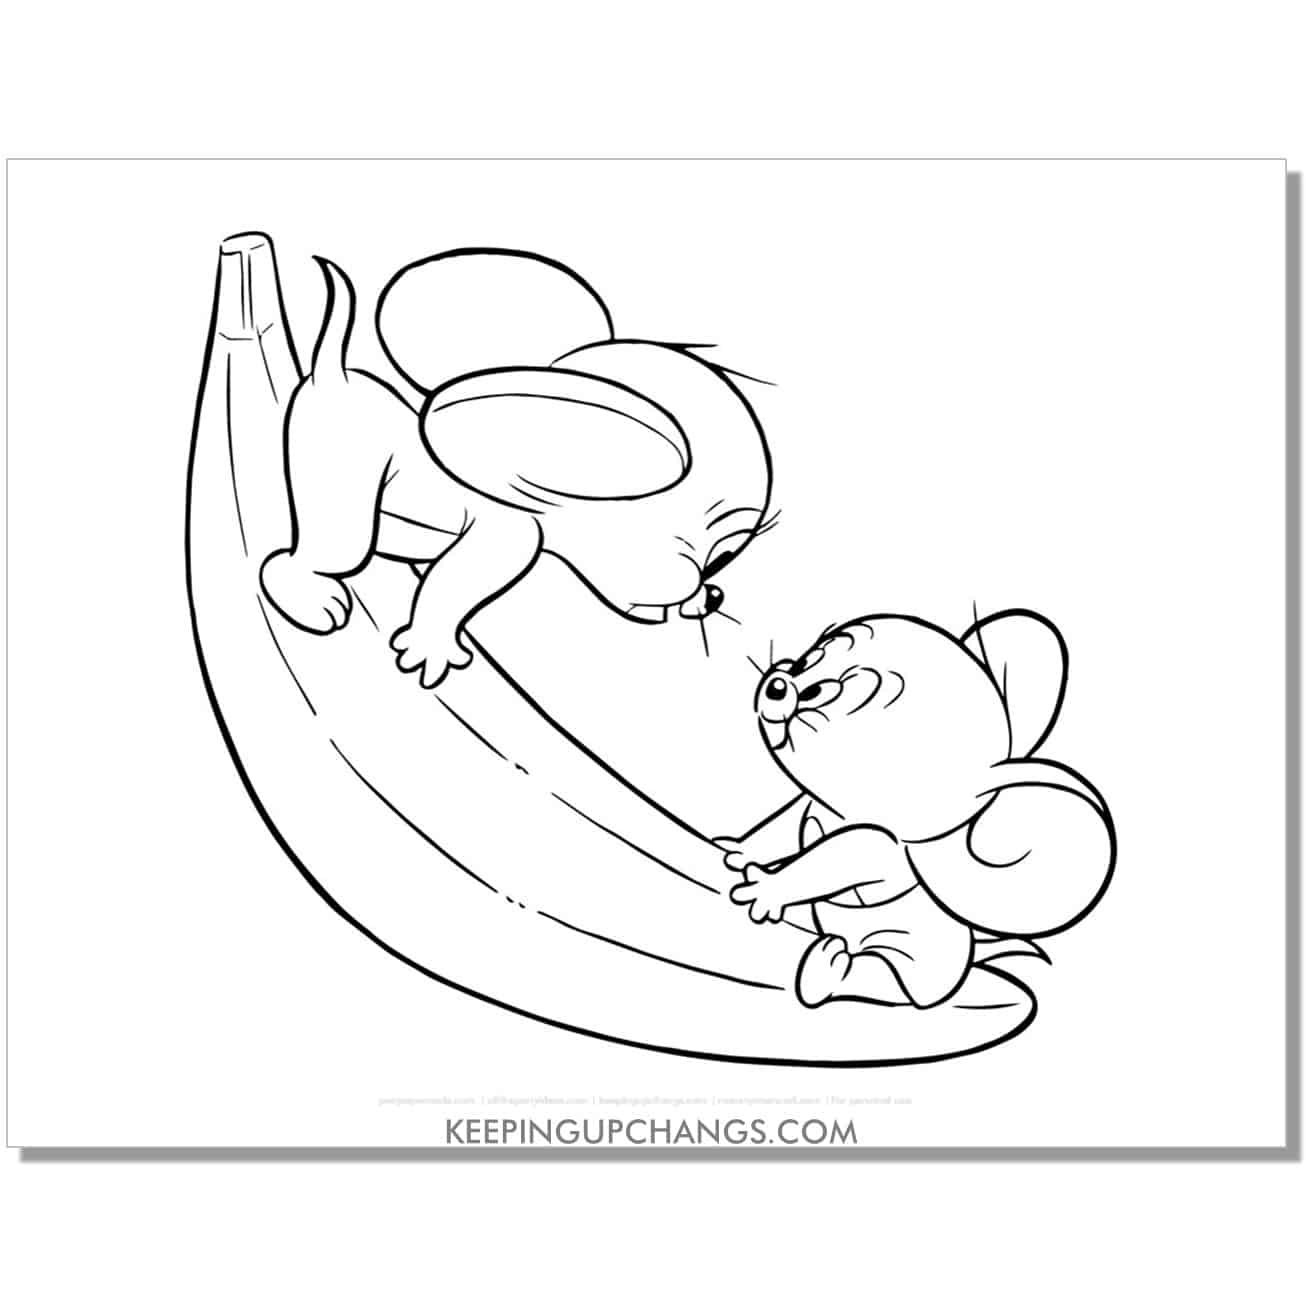 free jerry seesawing on banana coloring page.